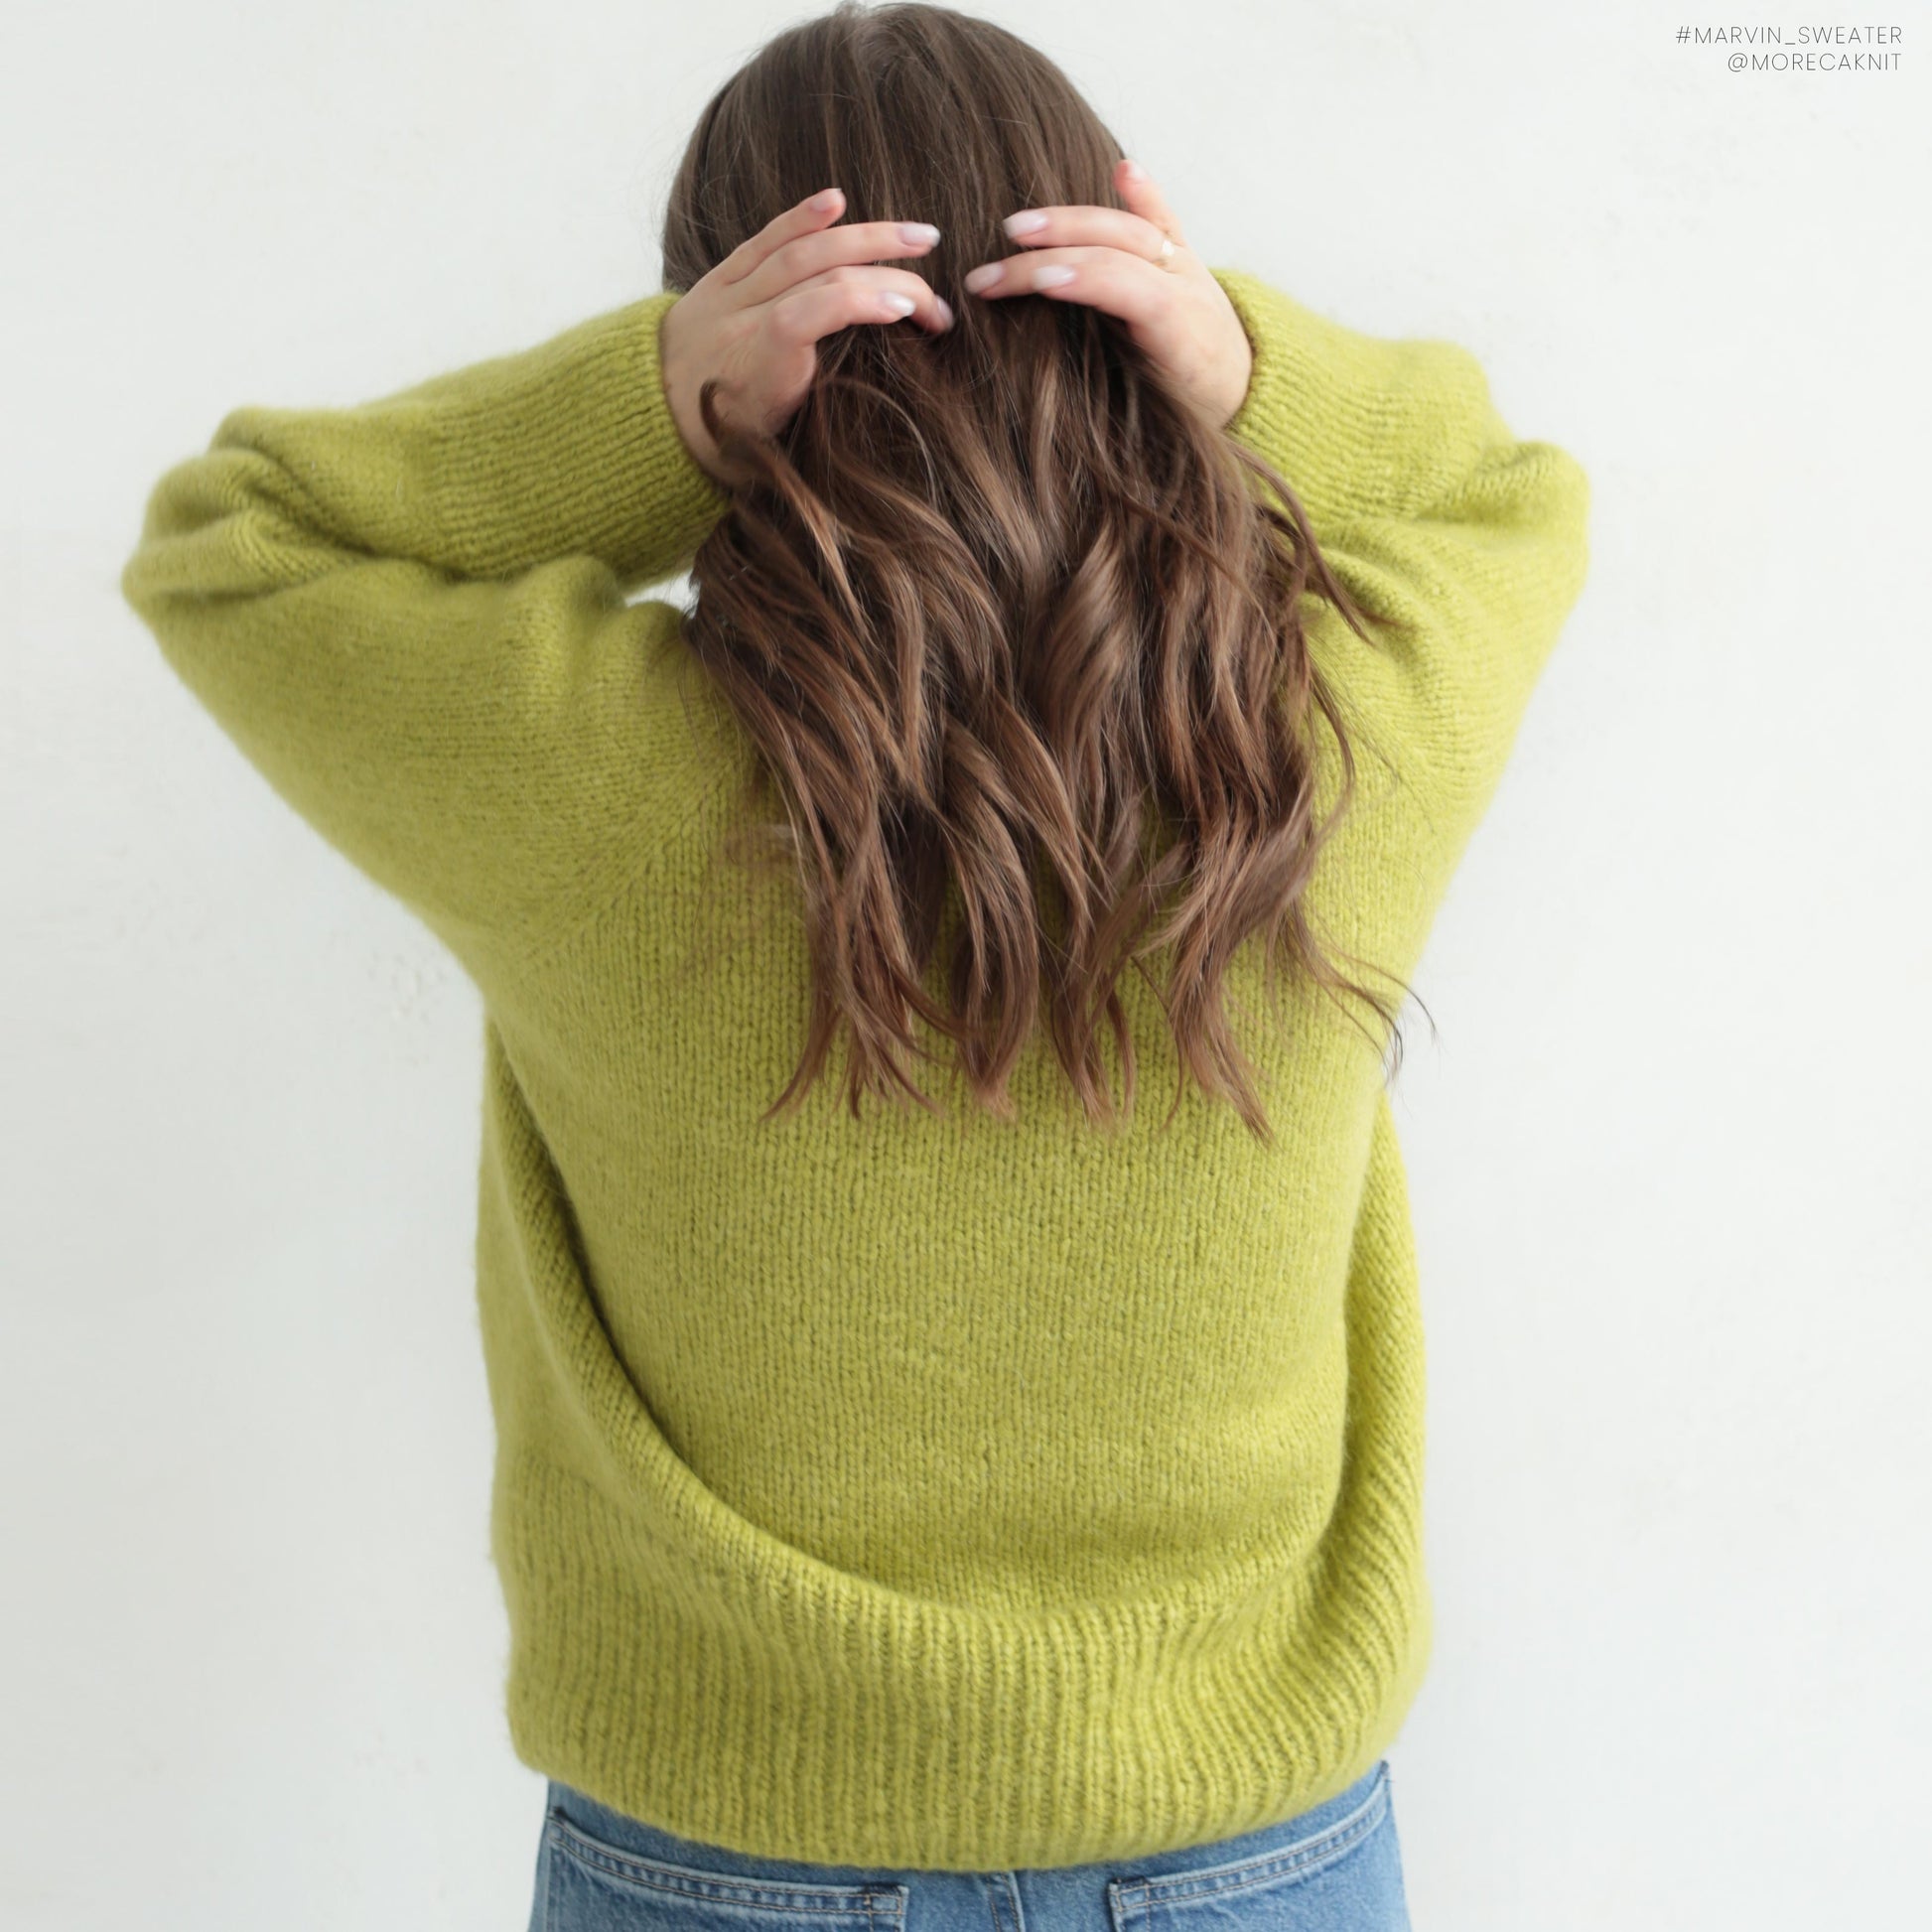 Marvin Sweater, a warm oversized sweater knitting pattern by MorecaKnit